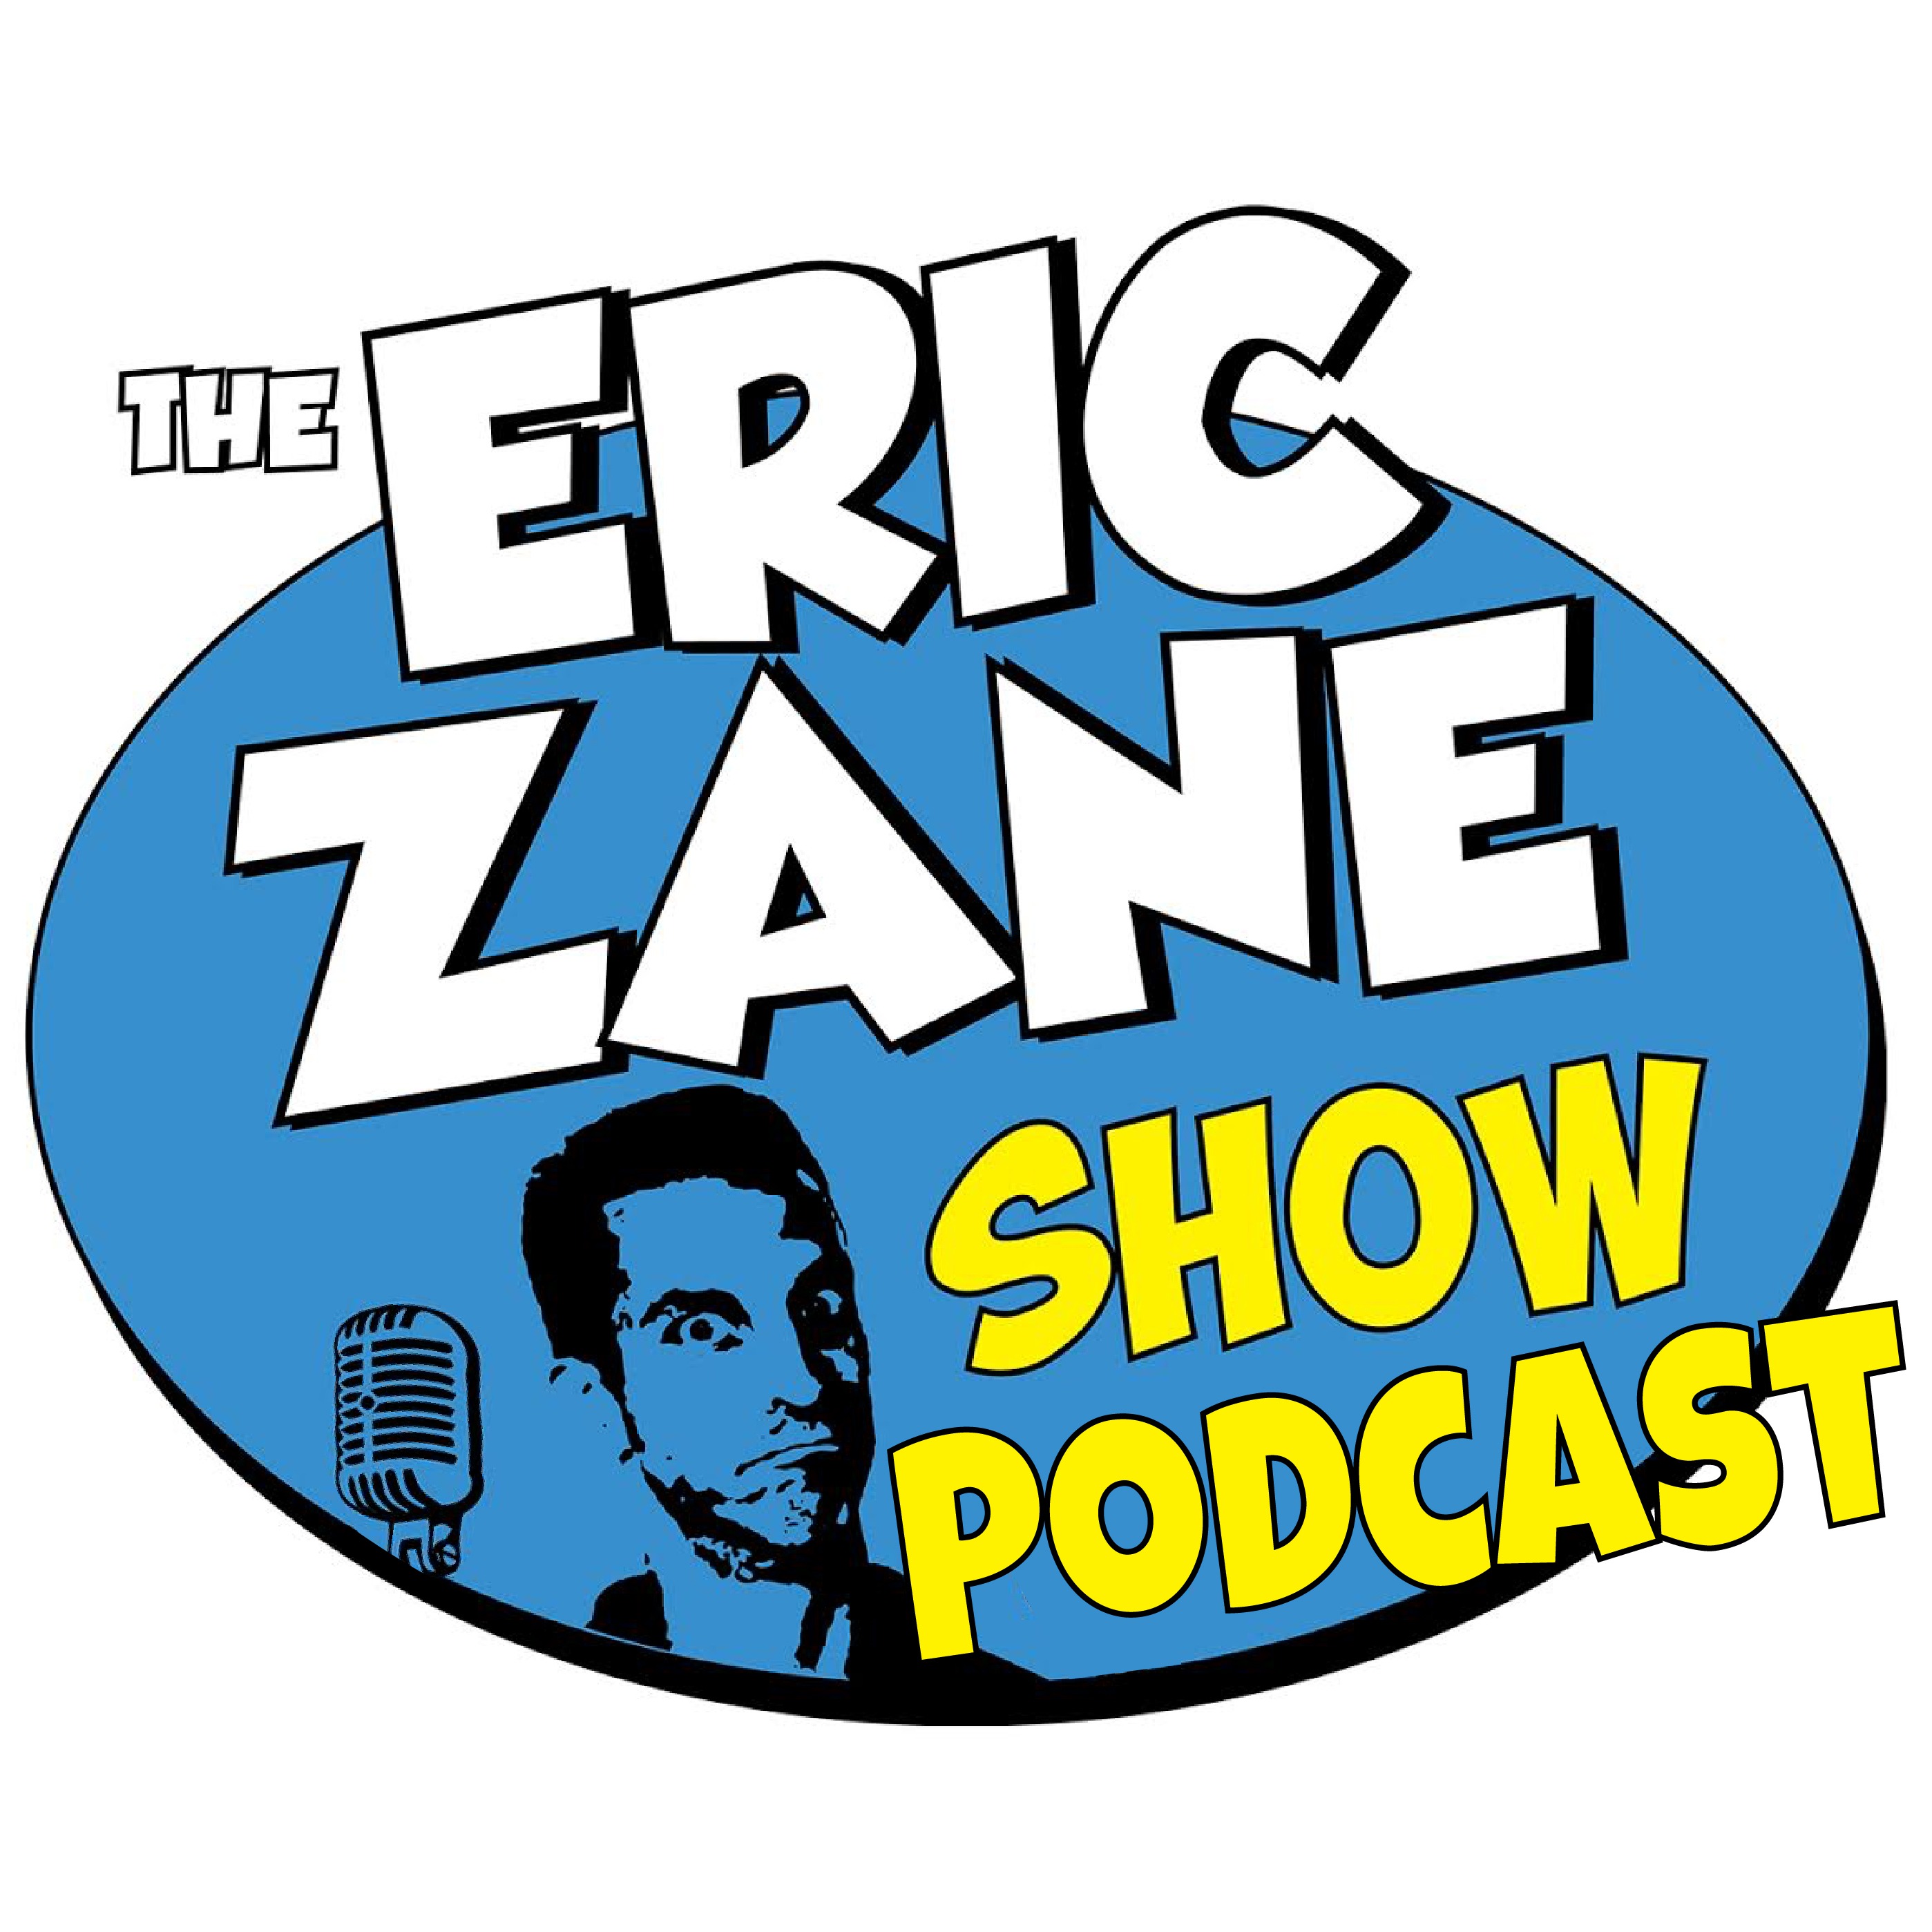 Eric Zane Show Podcast 797 The Bank of NFK.